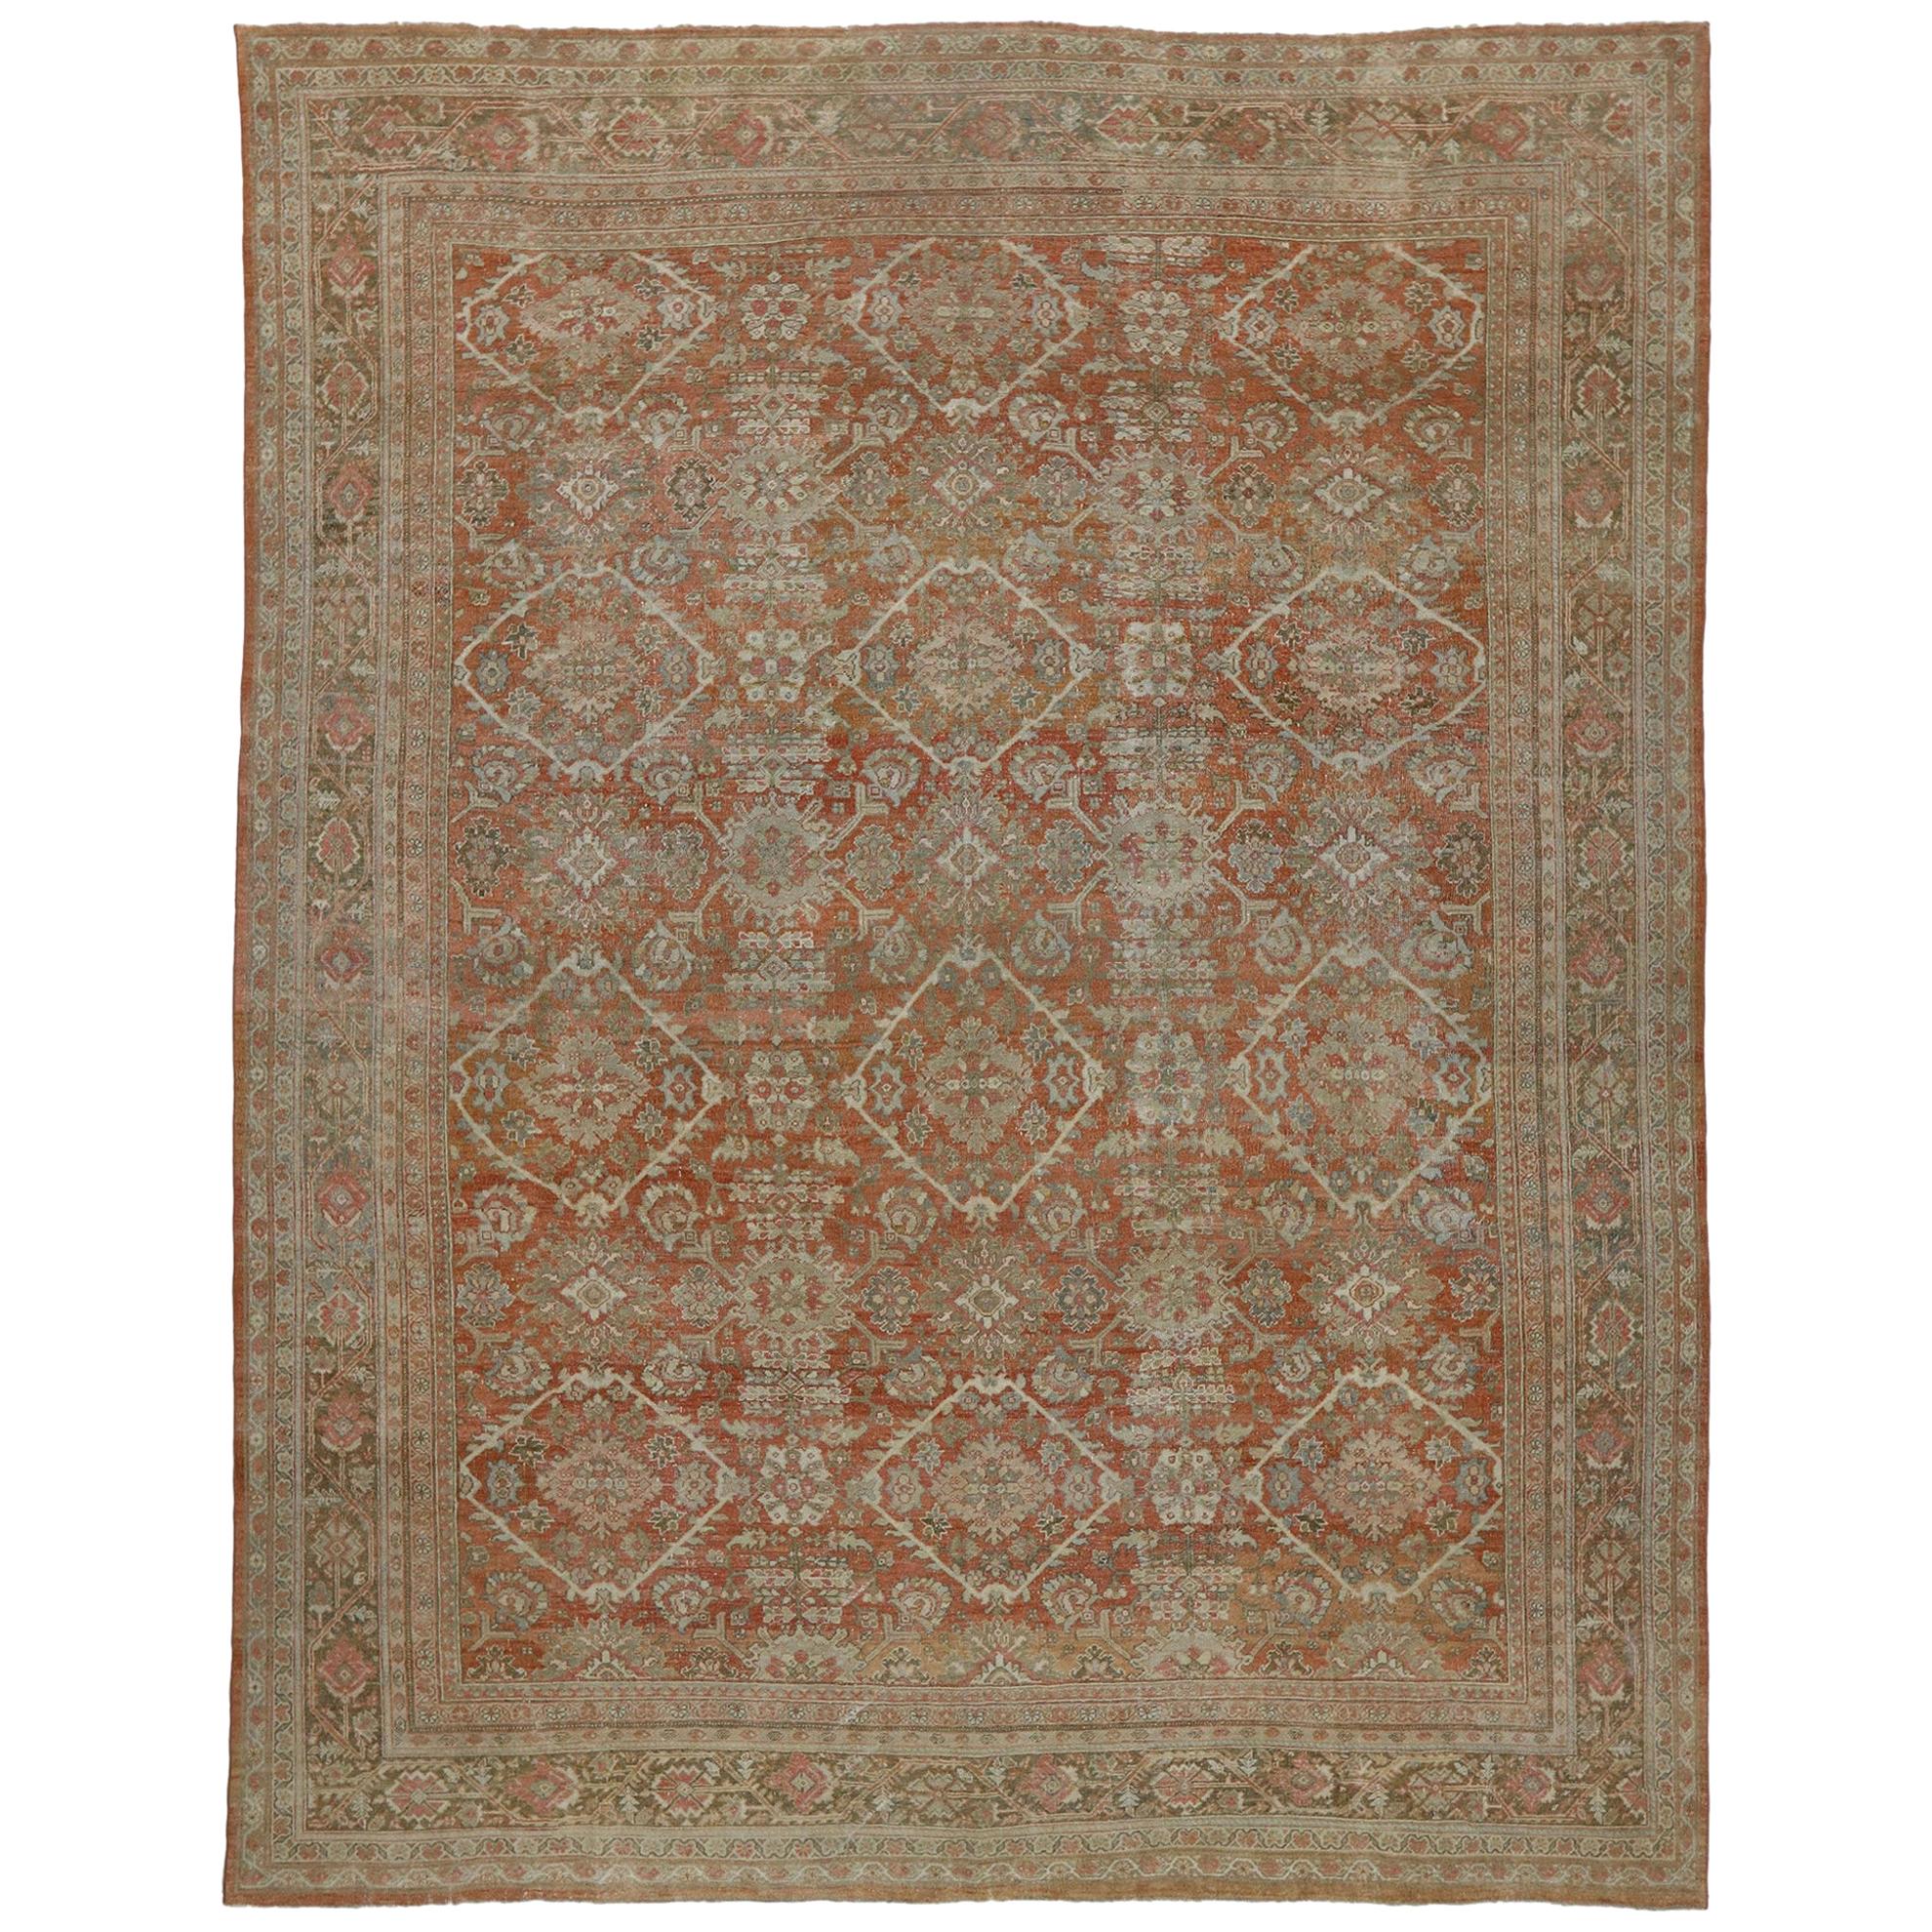 Distressed Antique Persian Mahal Rug with Rustic Spanish Mission Style